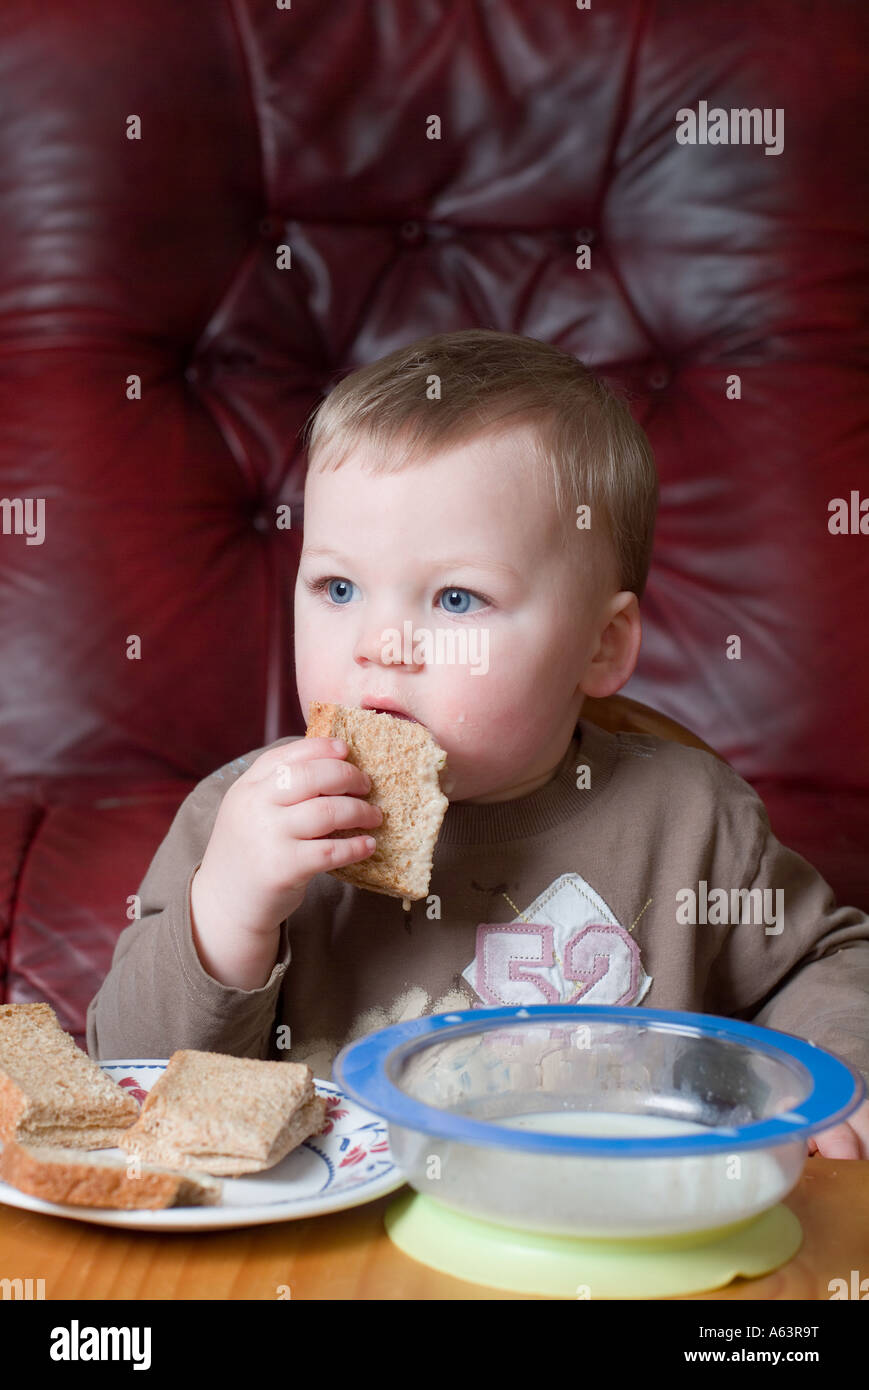 2 year old boy eating at home Stock Photo